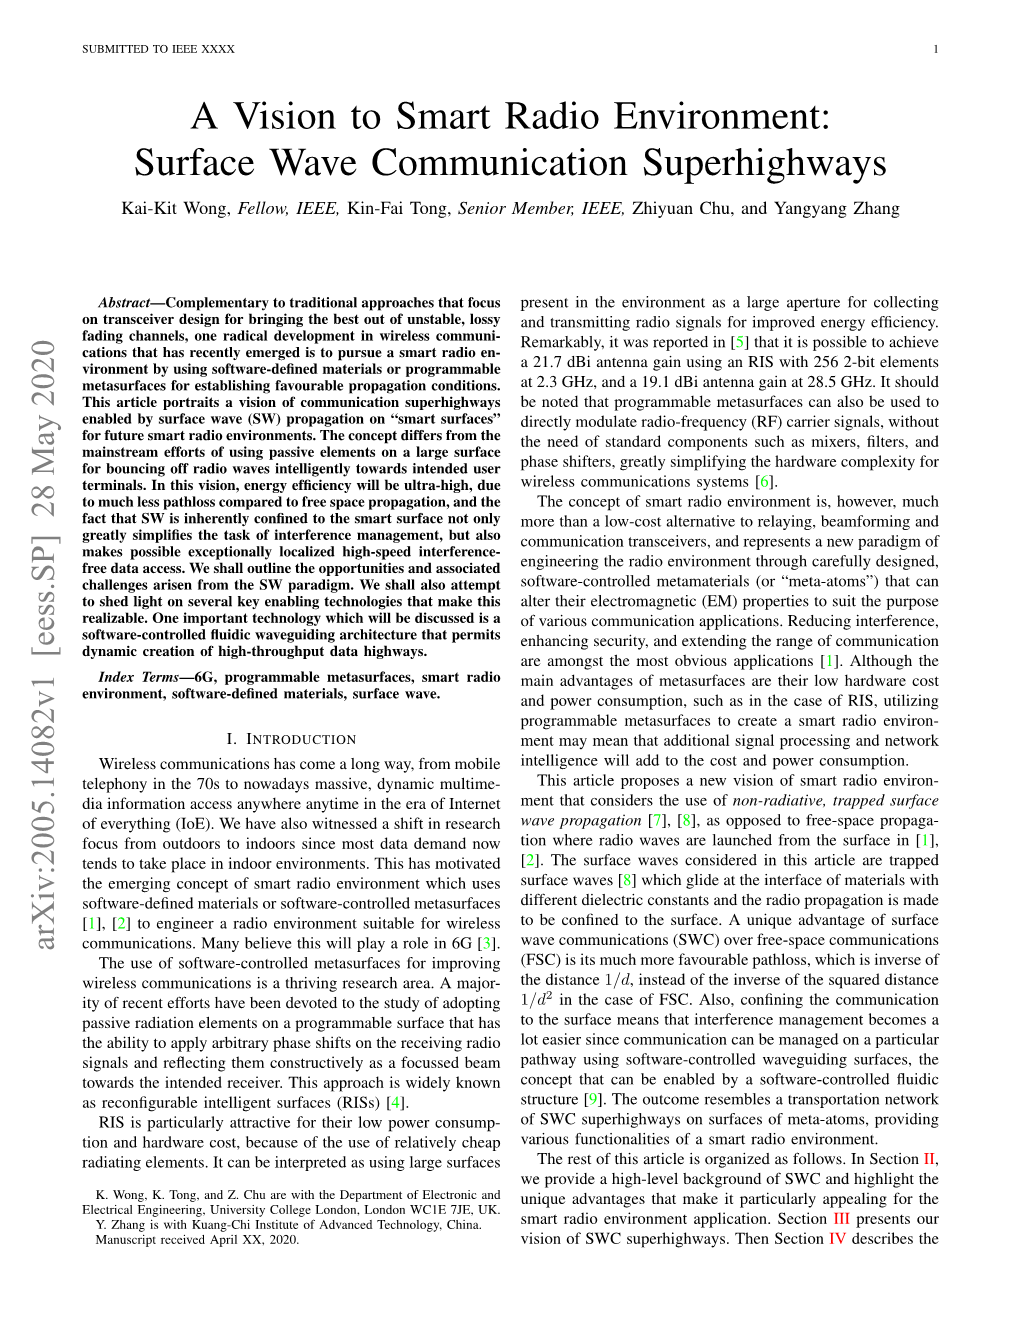 A Vision to Smart Radio Environment: Surface Wave